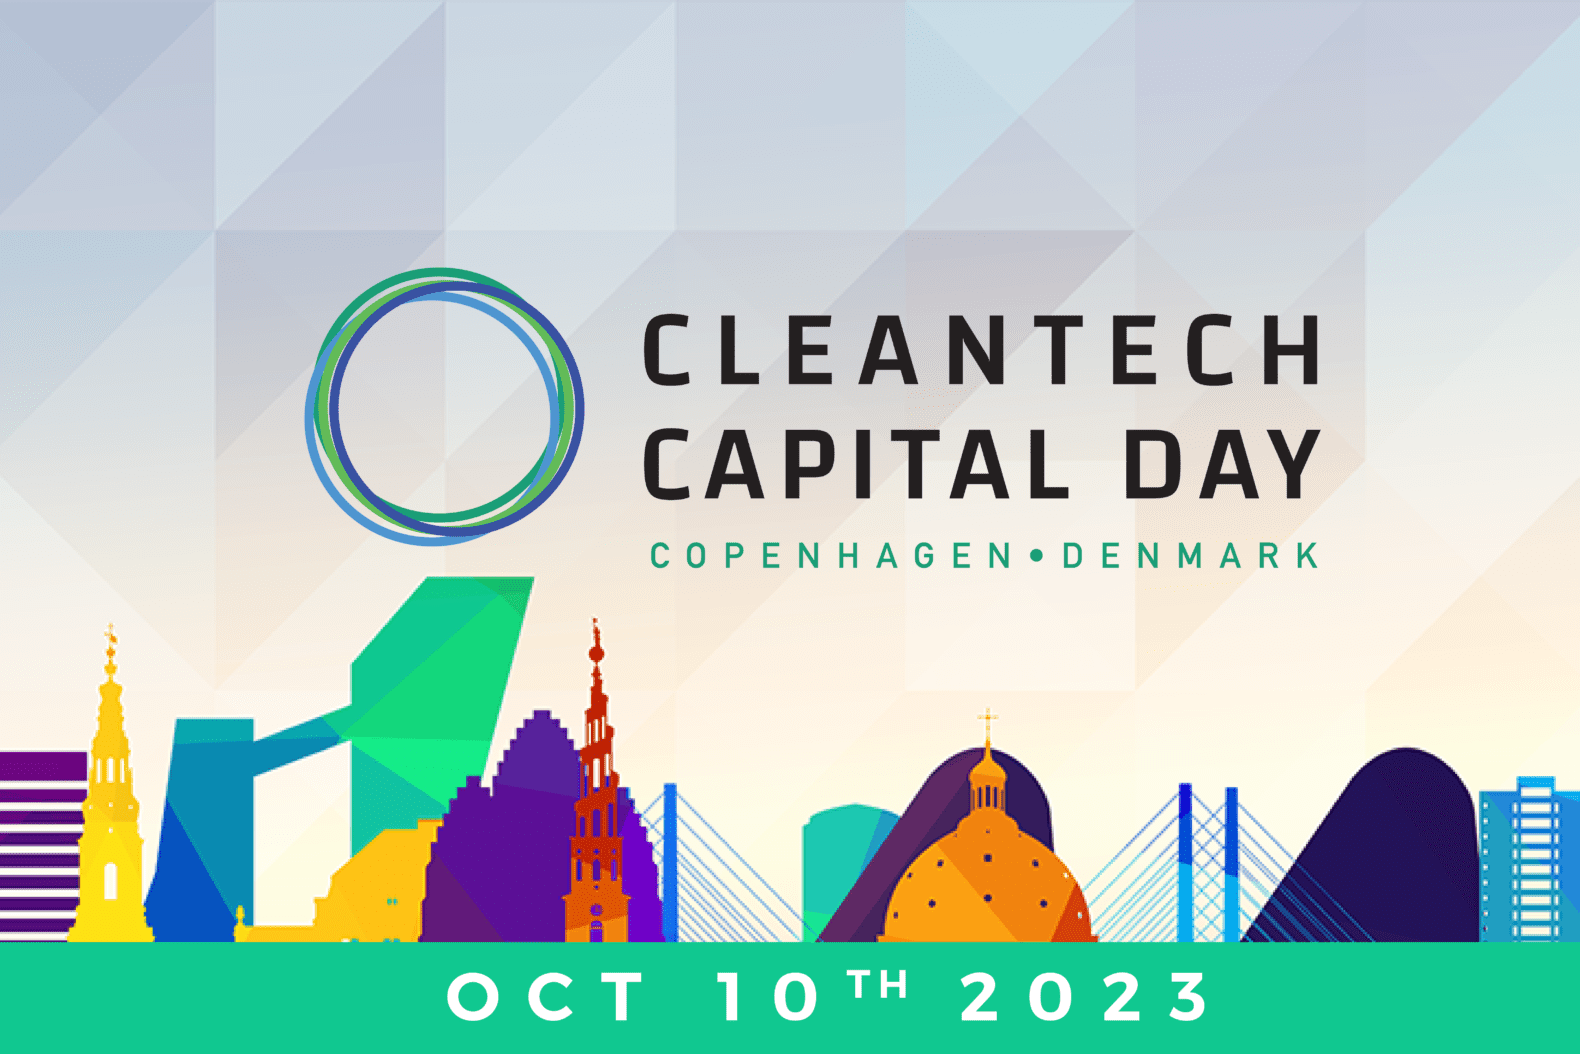 CLEANTECH CAPITAL DAY